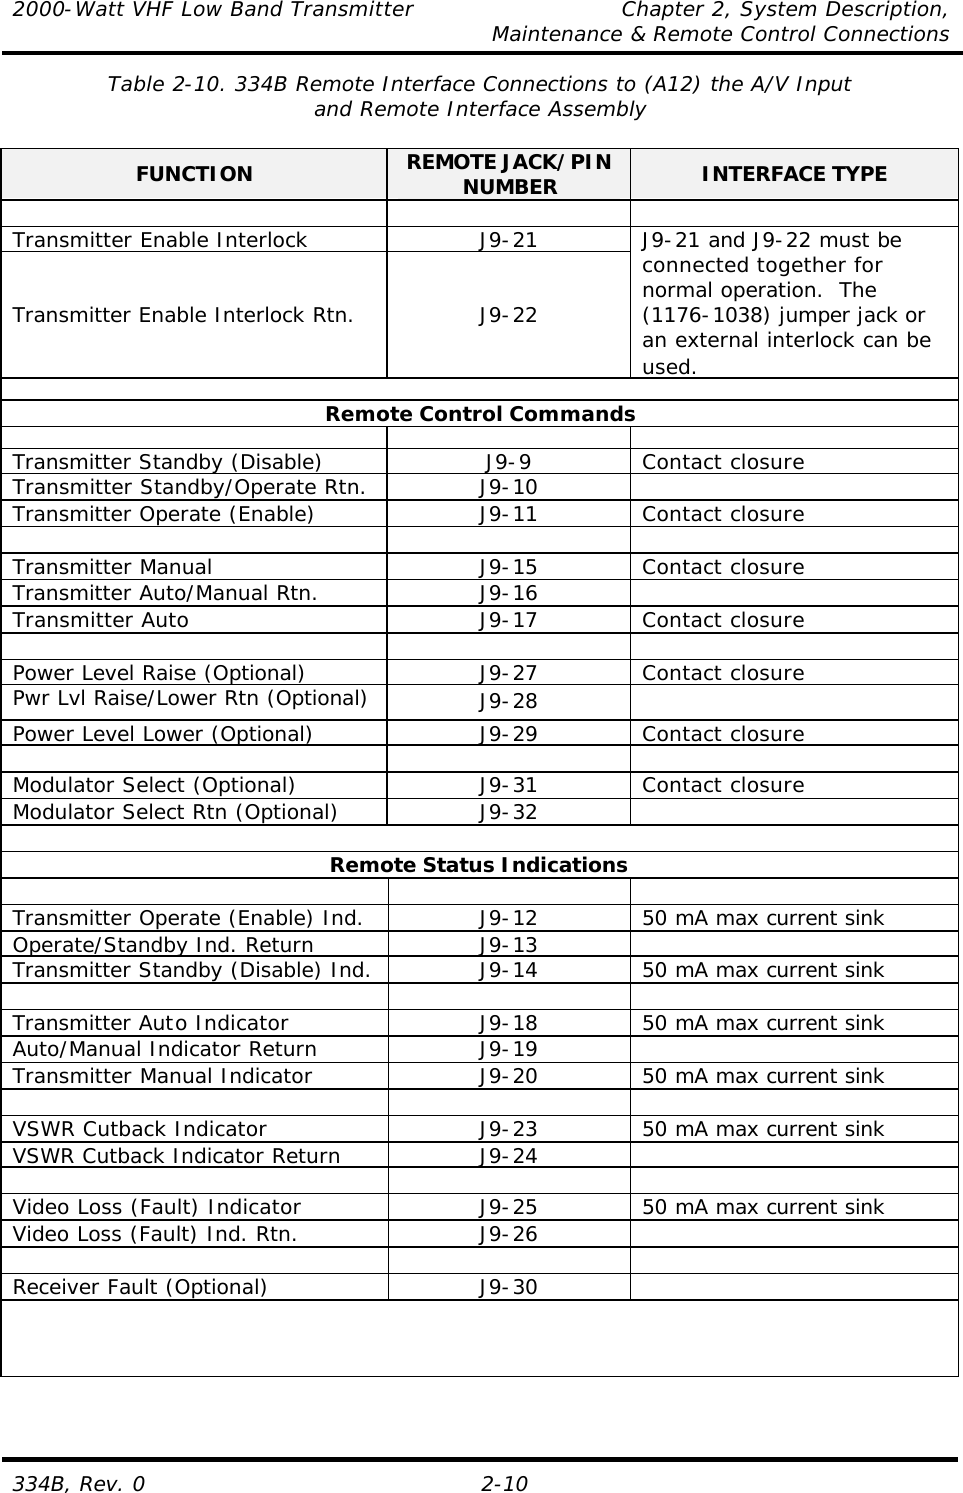 2000-Watt VHF Low Band Transmitter    Chapter 2, System Description,     Maintenance &amp; Remote Control Connections 334B, Rev. 0 2-10 Table 2-10. 334B Remote Interface Connections to (A12) the A/V Input and Remote Interface Assembly  FUNCTION REMOTE JACK/PIN NUMBER INTERFACE TYPE    Transmitter Enable Interlock J9-21 Transmitter Enable Interlock Rtn. J9-22 J9-21 and J9-22 must be connected together for normal operation.  The (1176-1038) jumper jack or an external interlock can be used.  Remote Control Commands      Transmitter Standby (Disable) J9-9 Contact closure Transmitter Standby/Operate Rtn. J9-10   Transmitter Operate (Enable) J9-11 Contact closure      Transmitter Manual J9-15 Contact closure Transmitter Auto/Manual Rtn. J9-16   Transmitter Auto J9-17 Contact closure      Power Level Raise (Optional) J9-27 Contact closure Pwr Lvl Raise/Lower Rtn (Optional) J9-28  Power Level Lower (Optional) J9-29 Contact closure      Modulator Select (Optional) J9-31 Contact closure Modulator Select Rtn (Optional) J9-32    Remote Status Indications      Transmitter Operate (Enable) Ind. J9-12 50 mA max current sink Operate/Standby Ind. Return J9-13   Transmitter Standby (Disable) Ind. J9-14 50 mA max current sink      Transmitter Auto Indicator J9-18 50 mA max current sink Auto/Manual Indicator Return J9-19   Transmitter Manual Indicator J9-20 50 mA max current sink      VSWR Cutback Indicator J9-23 50 mA max current sink VSWR Cutback Indicator Return J9-24        Video Loss (Fault) Indicator J9-25 50 mA max current sink Video Loss (Fault) Ind. Rtn. J9-26        Receiver Fault (Optional) J9-30      